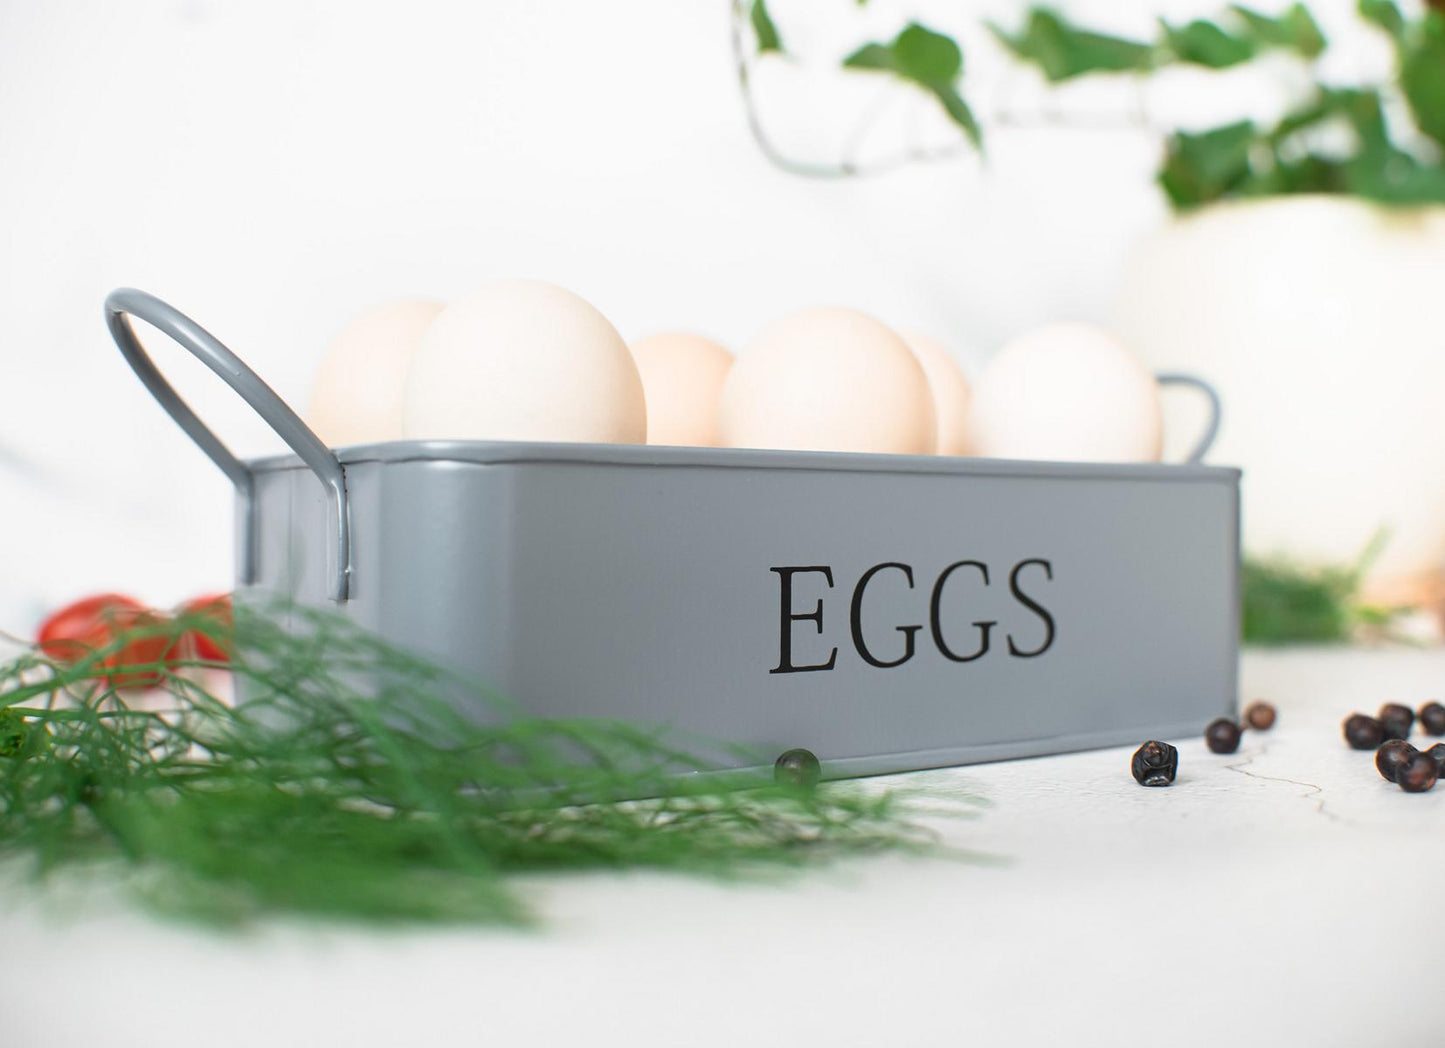 Set of 6 metal egg holders, egg stand, egg cups, egg plates, egg containers